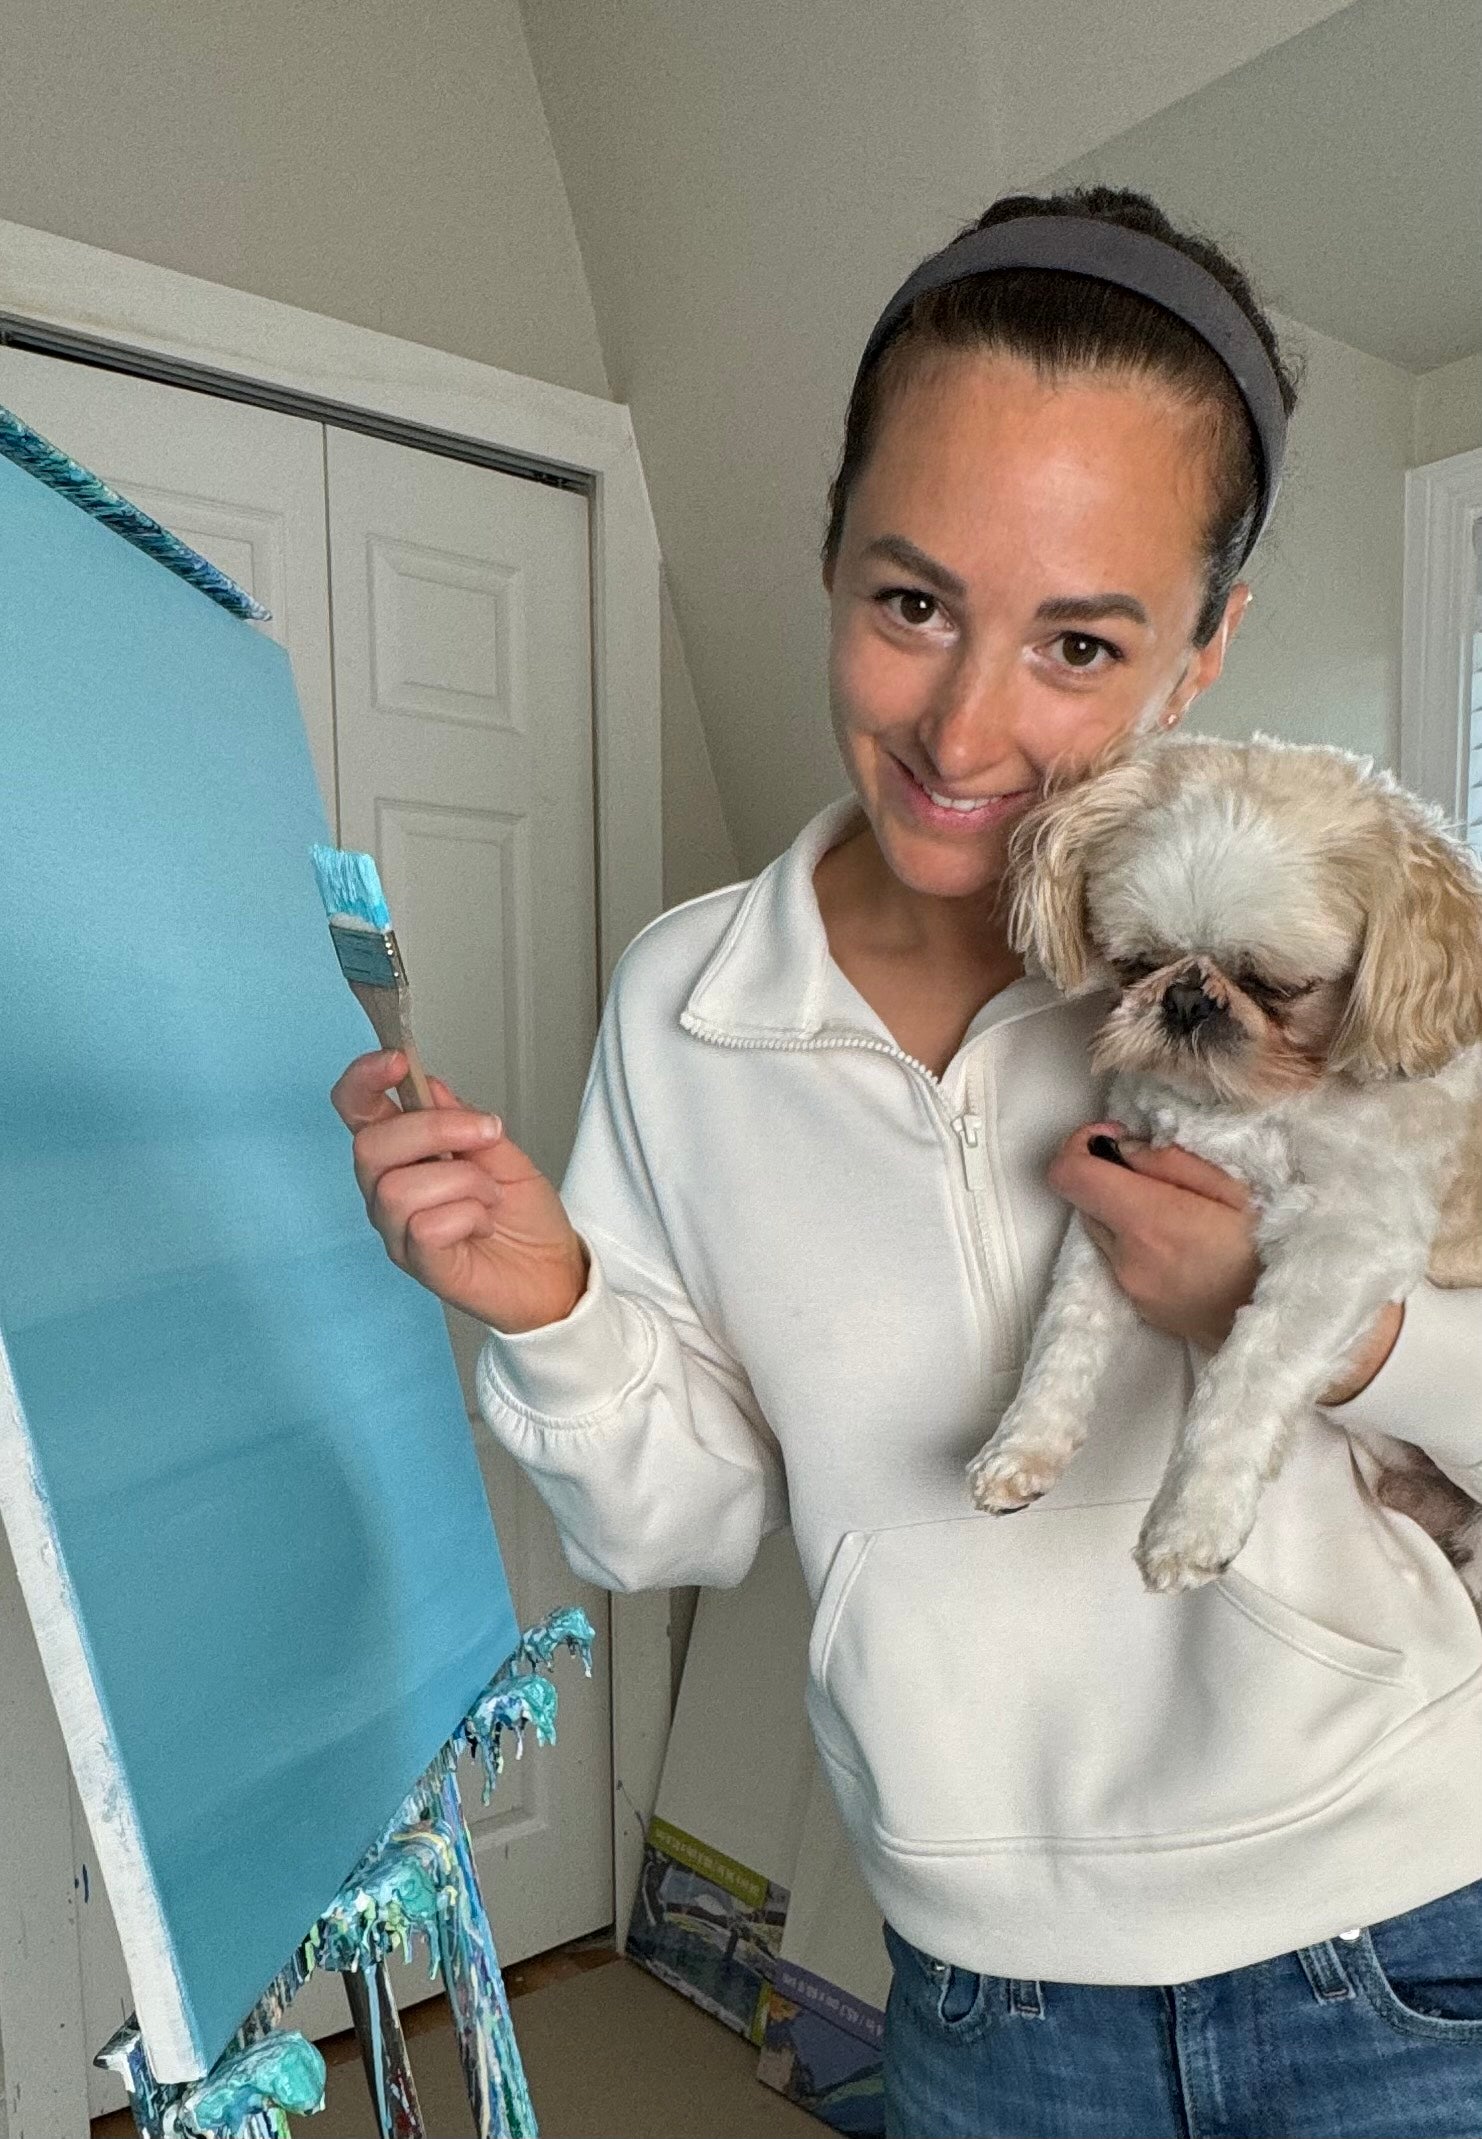 A Caucasian woman holds a small white and tan dog in her left arm. With the right arm she is painting a canvas with a light blue, abstract design.